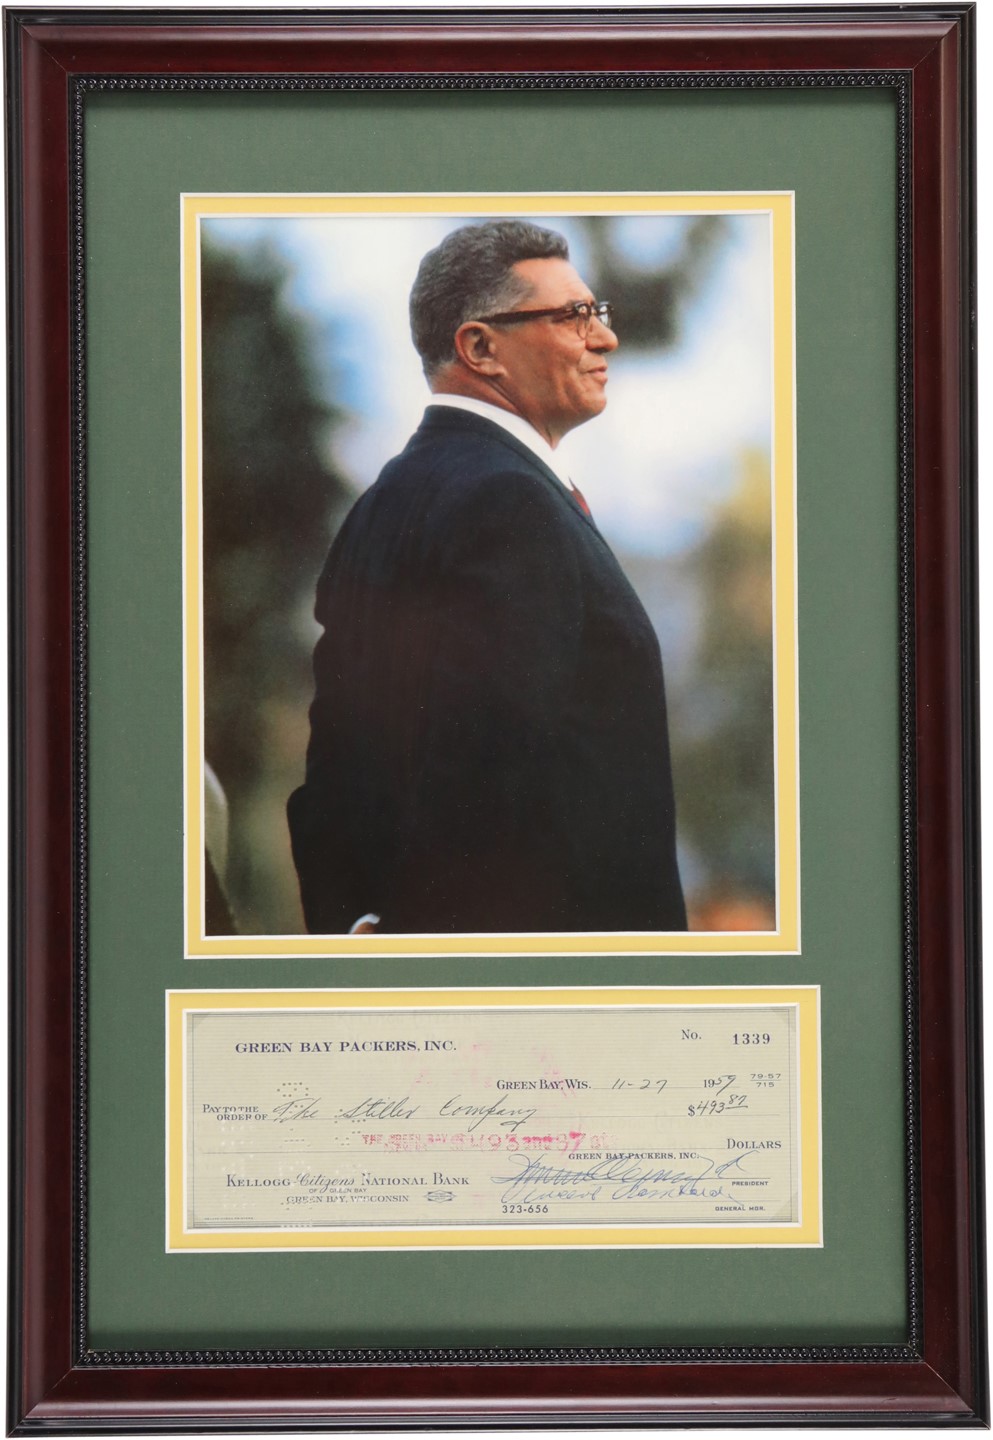 - 1959 Vince Lombardi Signed Green Bay Packers Check (PSA)